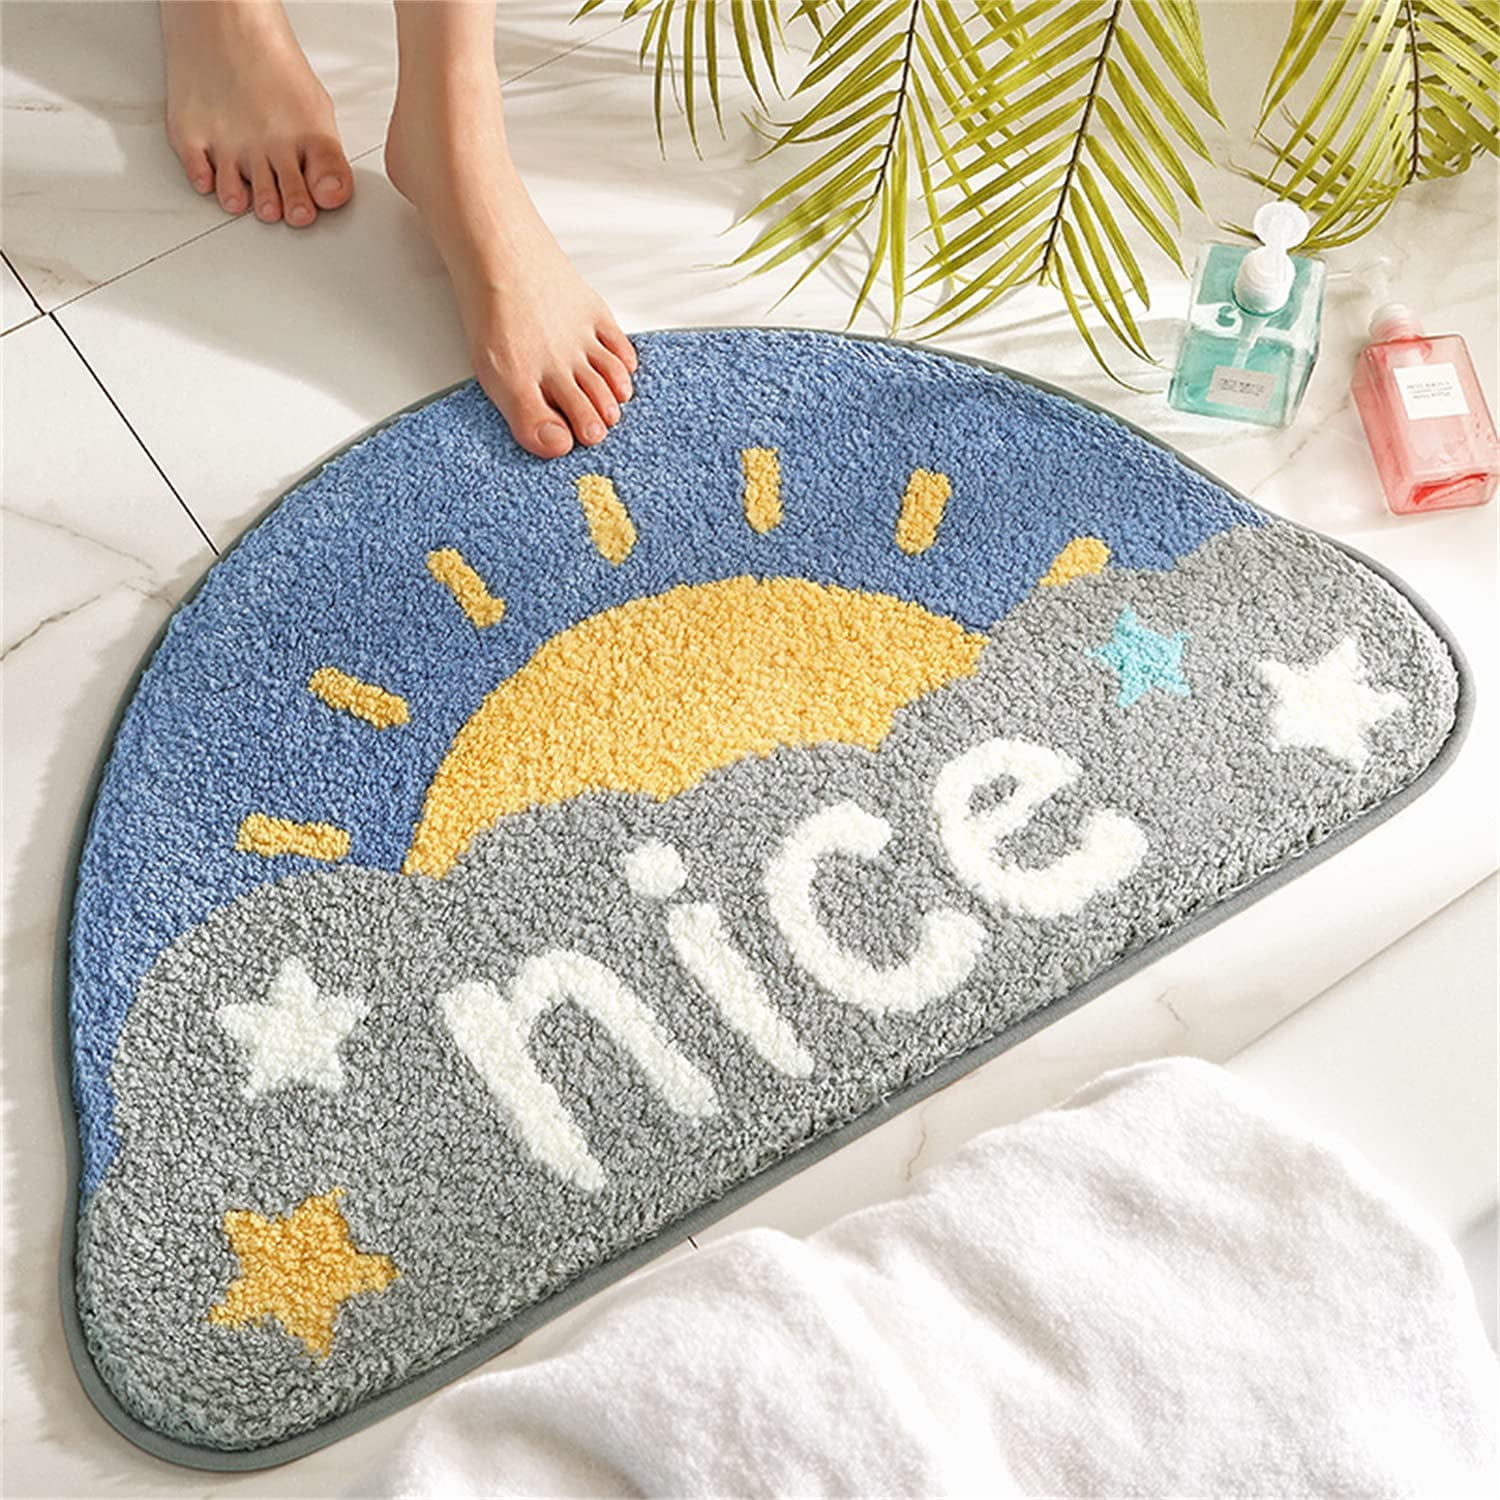 Details about   Non Slip Bath Mat Small Large Water Absorbent Kitchen Doormat Washable Rug 